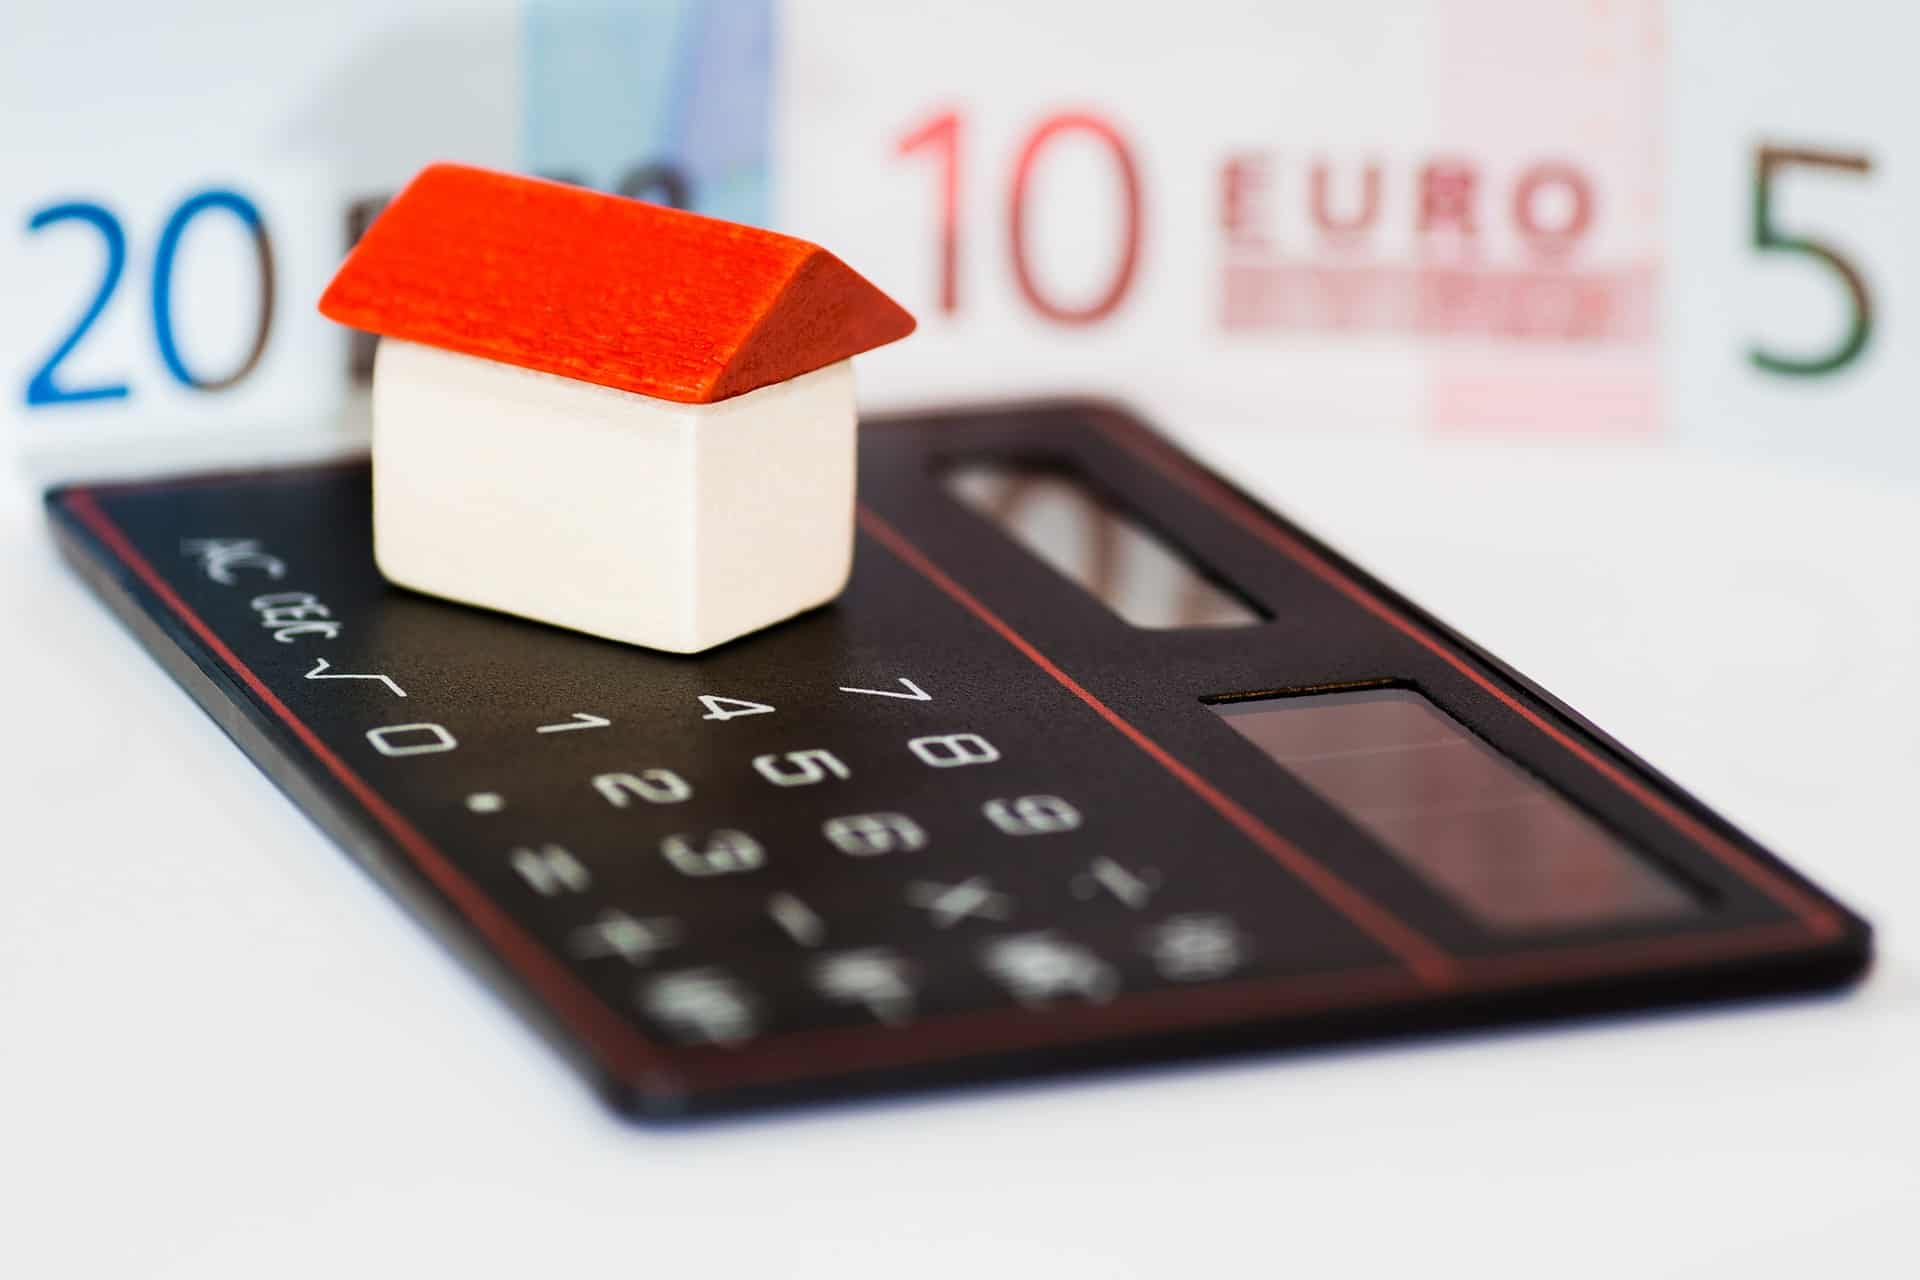 Cost of living Ireland: Homeowners can save €1,920 a year on mortgage with expert’s advice